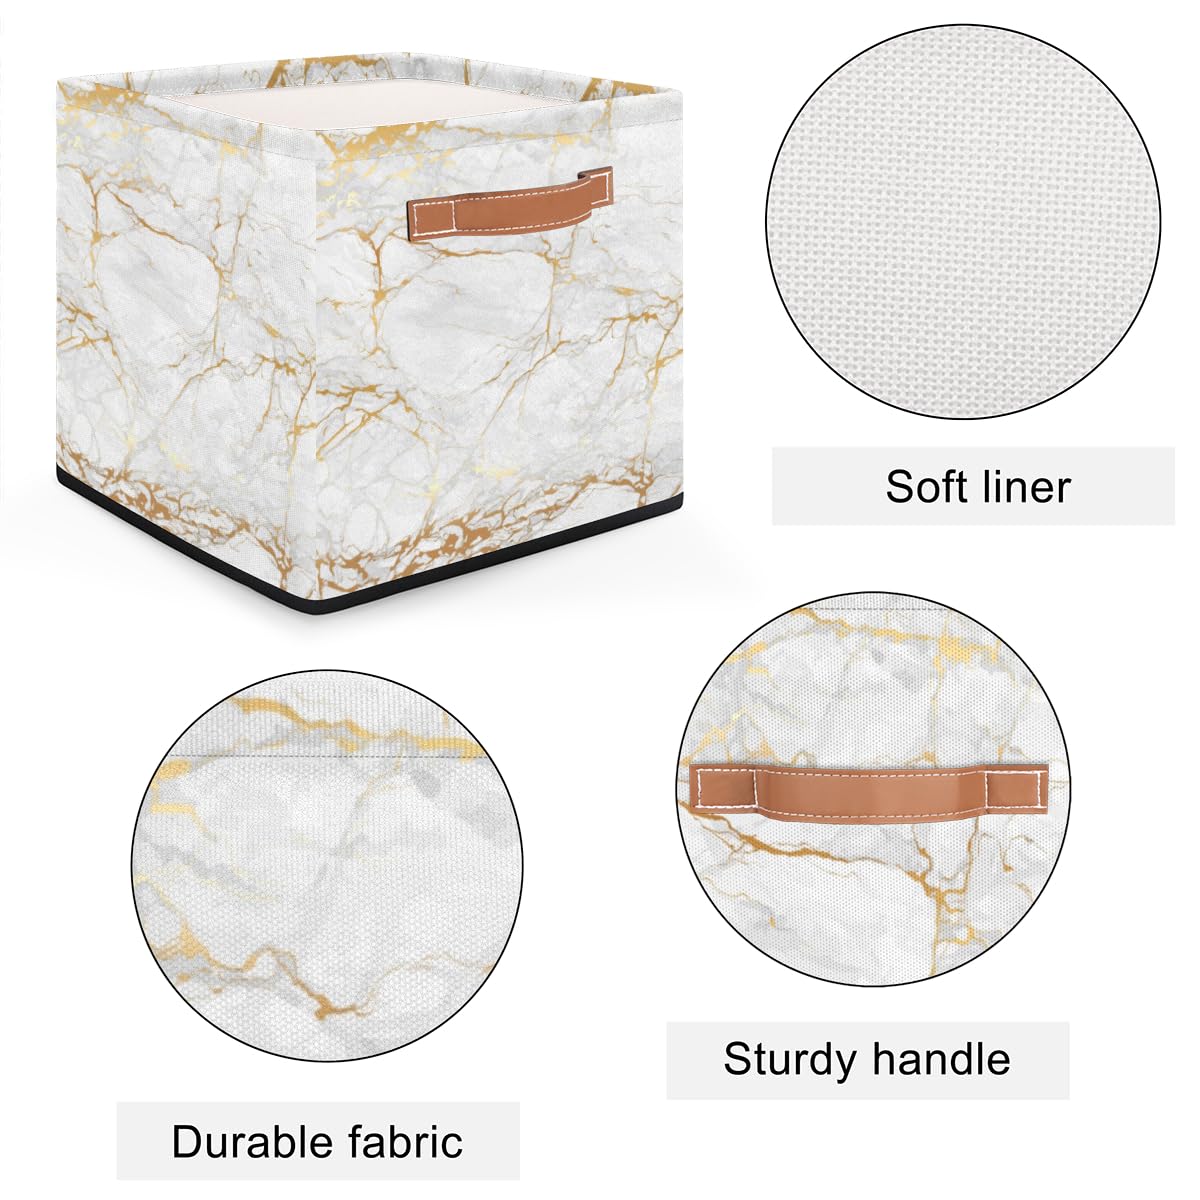 KOBLEN Marble Golden Square Storage Basket Collapsible Storage Box Clothes Basket 13x13 Inch Large Cube Storage Bin With PU Leather Handle for Home Office Closet Shelves